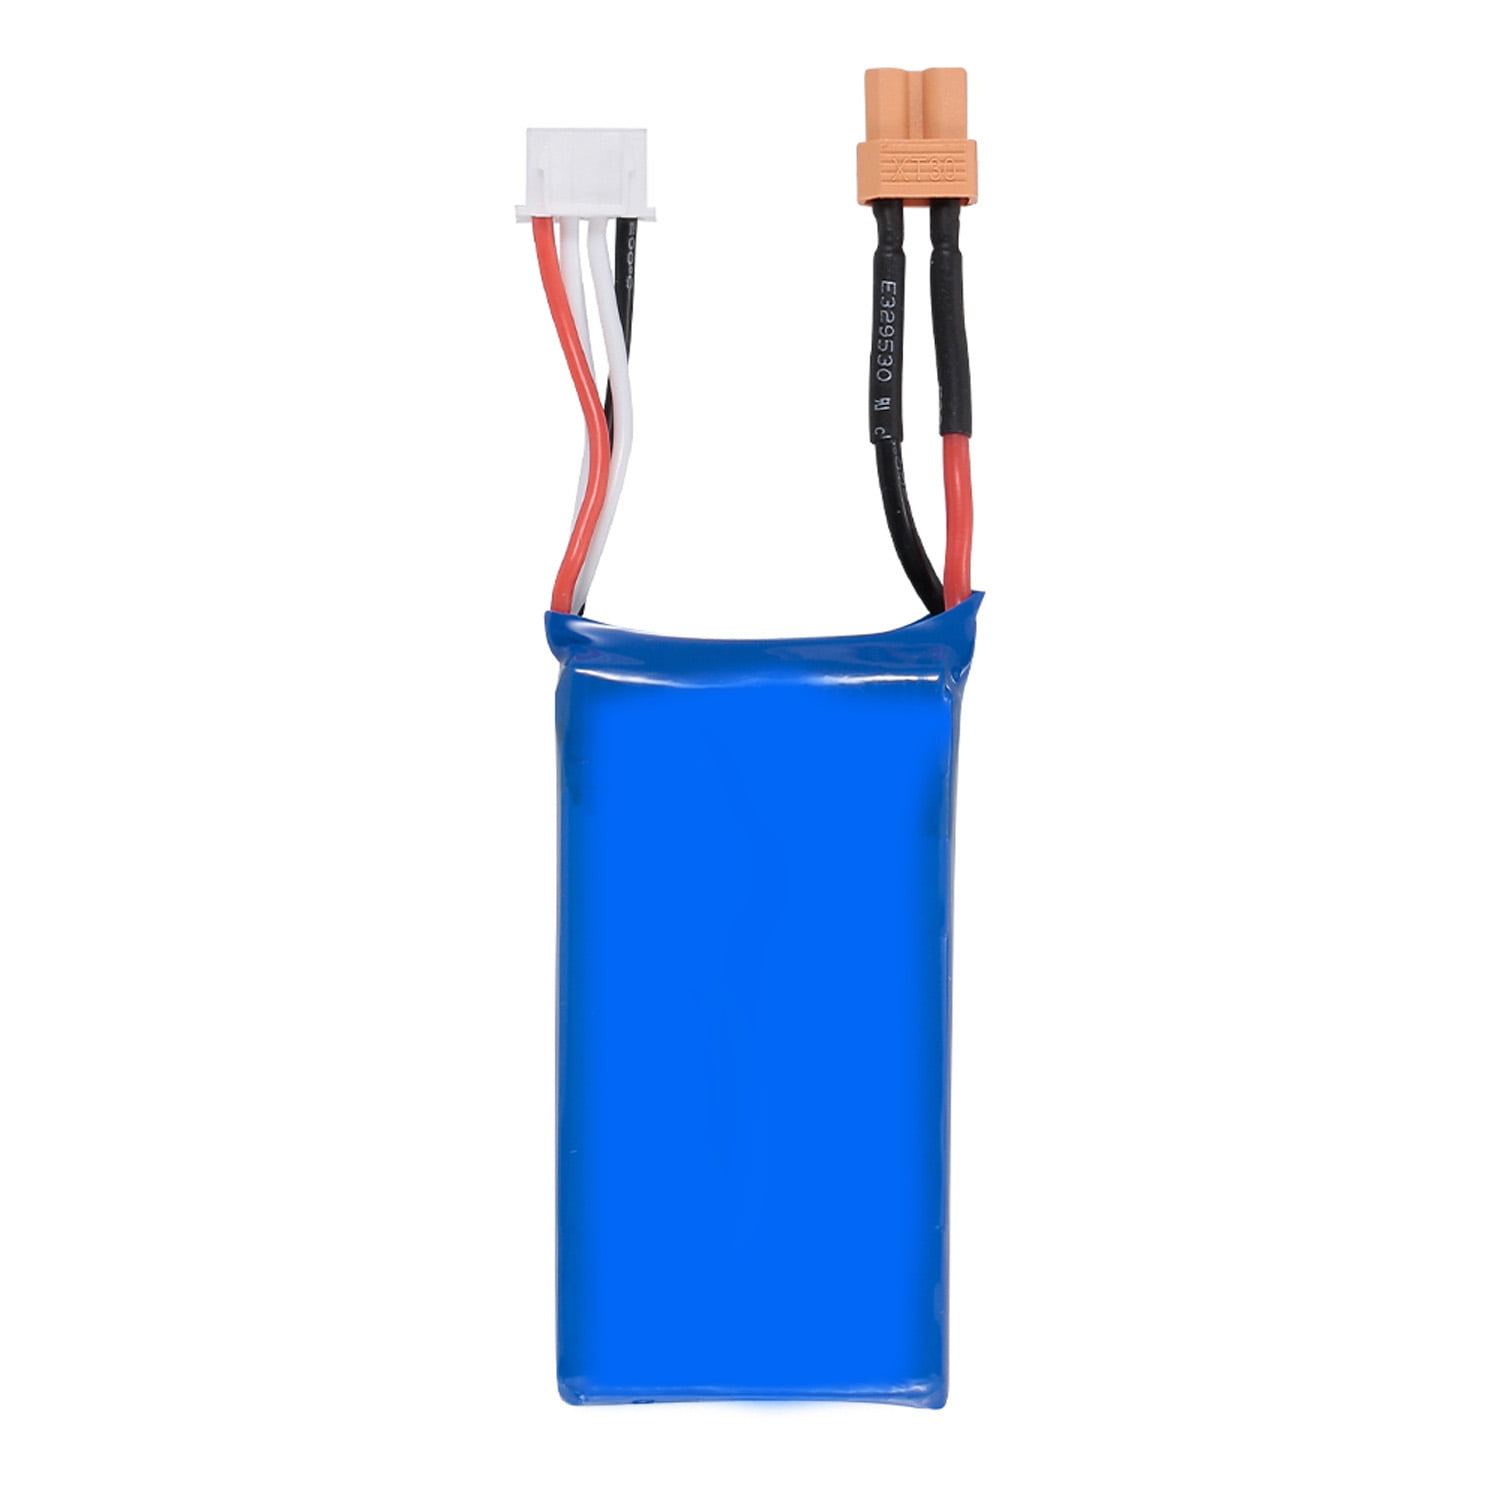 T-power 11.1V 1000mAh Lipo Battery For XK X450 FPV RC Drone Rechargeable Battery